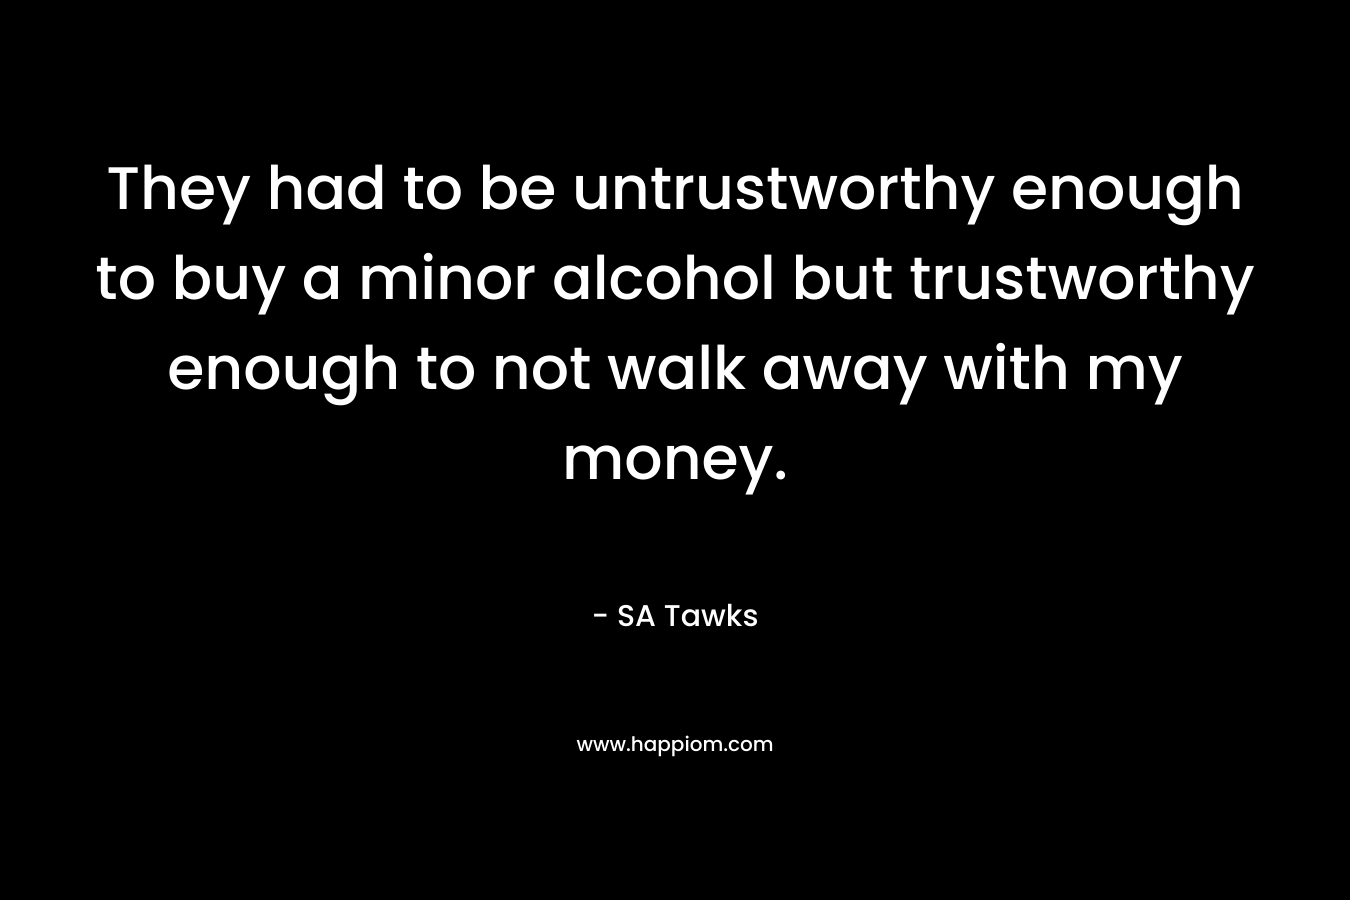 They had to be untrustworthy enough to buy a minor alcohol but trustworthy enough to not walk away with my money. – SA Tawks